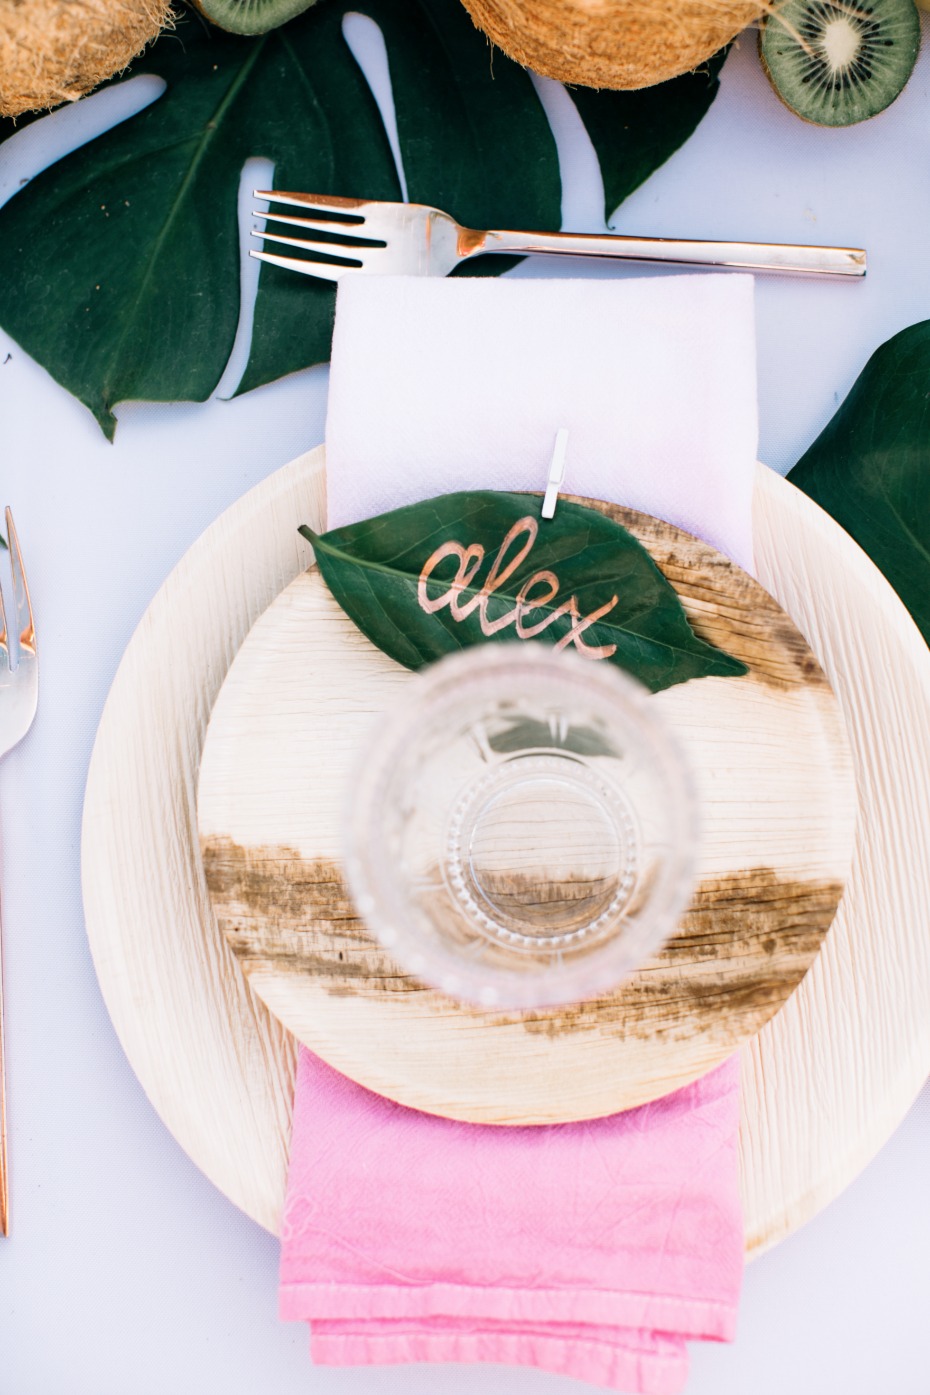 Babu disposable plates by Bambu were used at this wedding instead of traditional plates